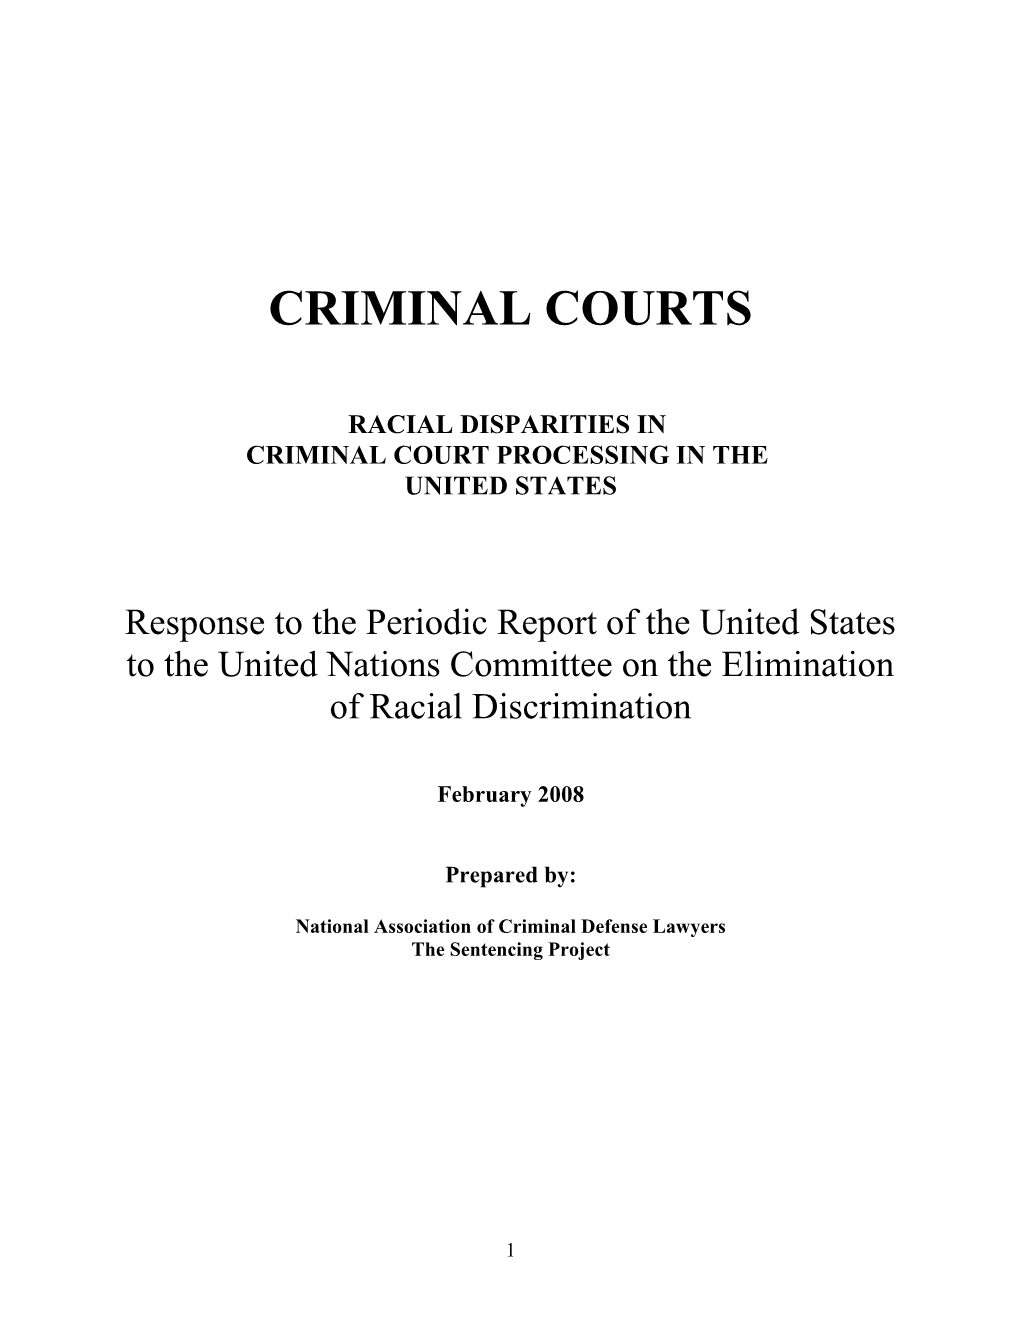 Criminal Court Processing in The